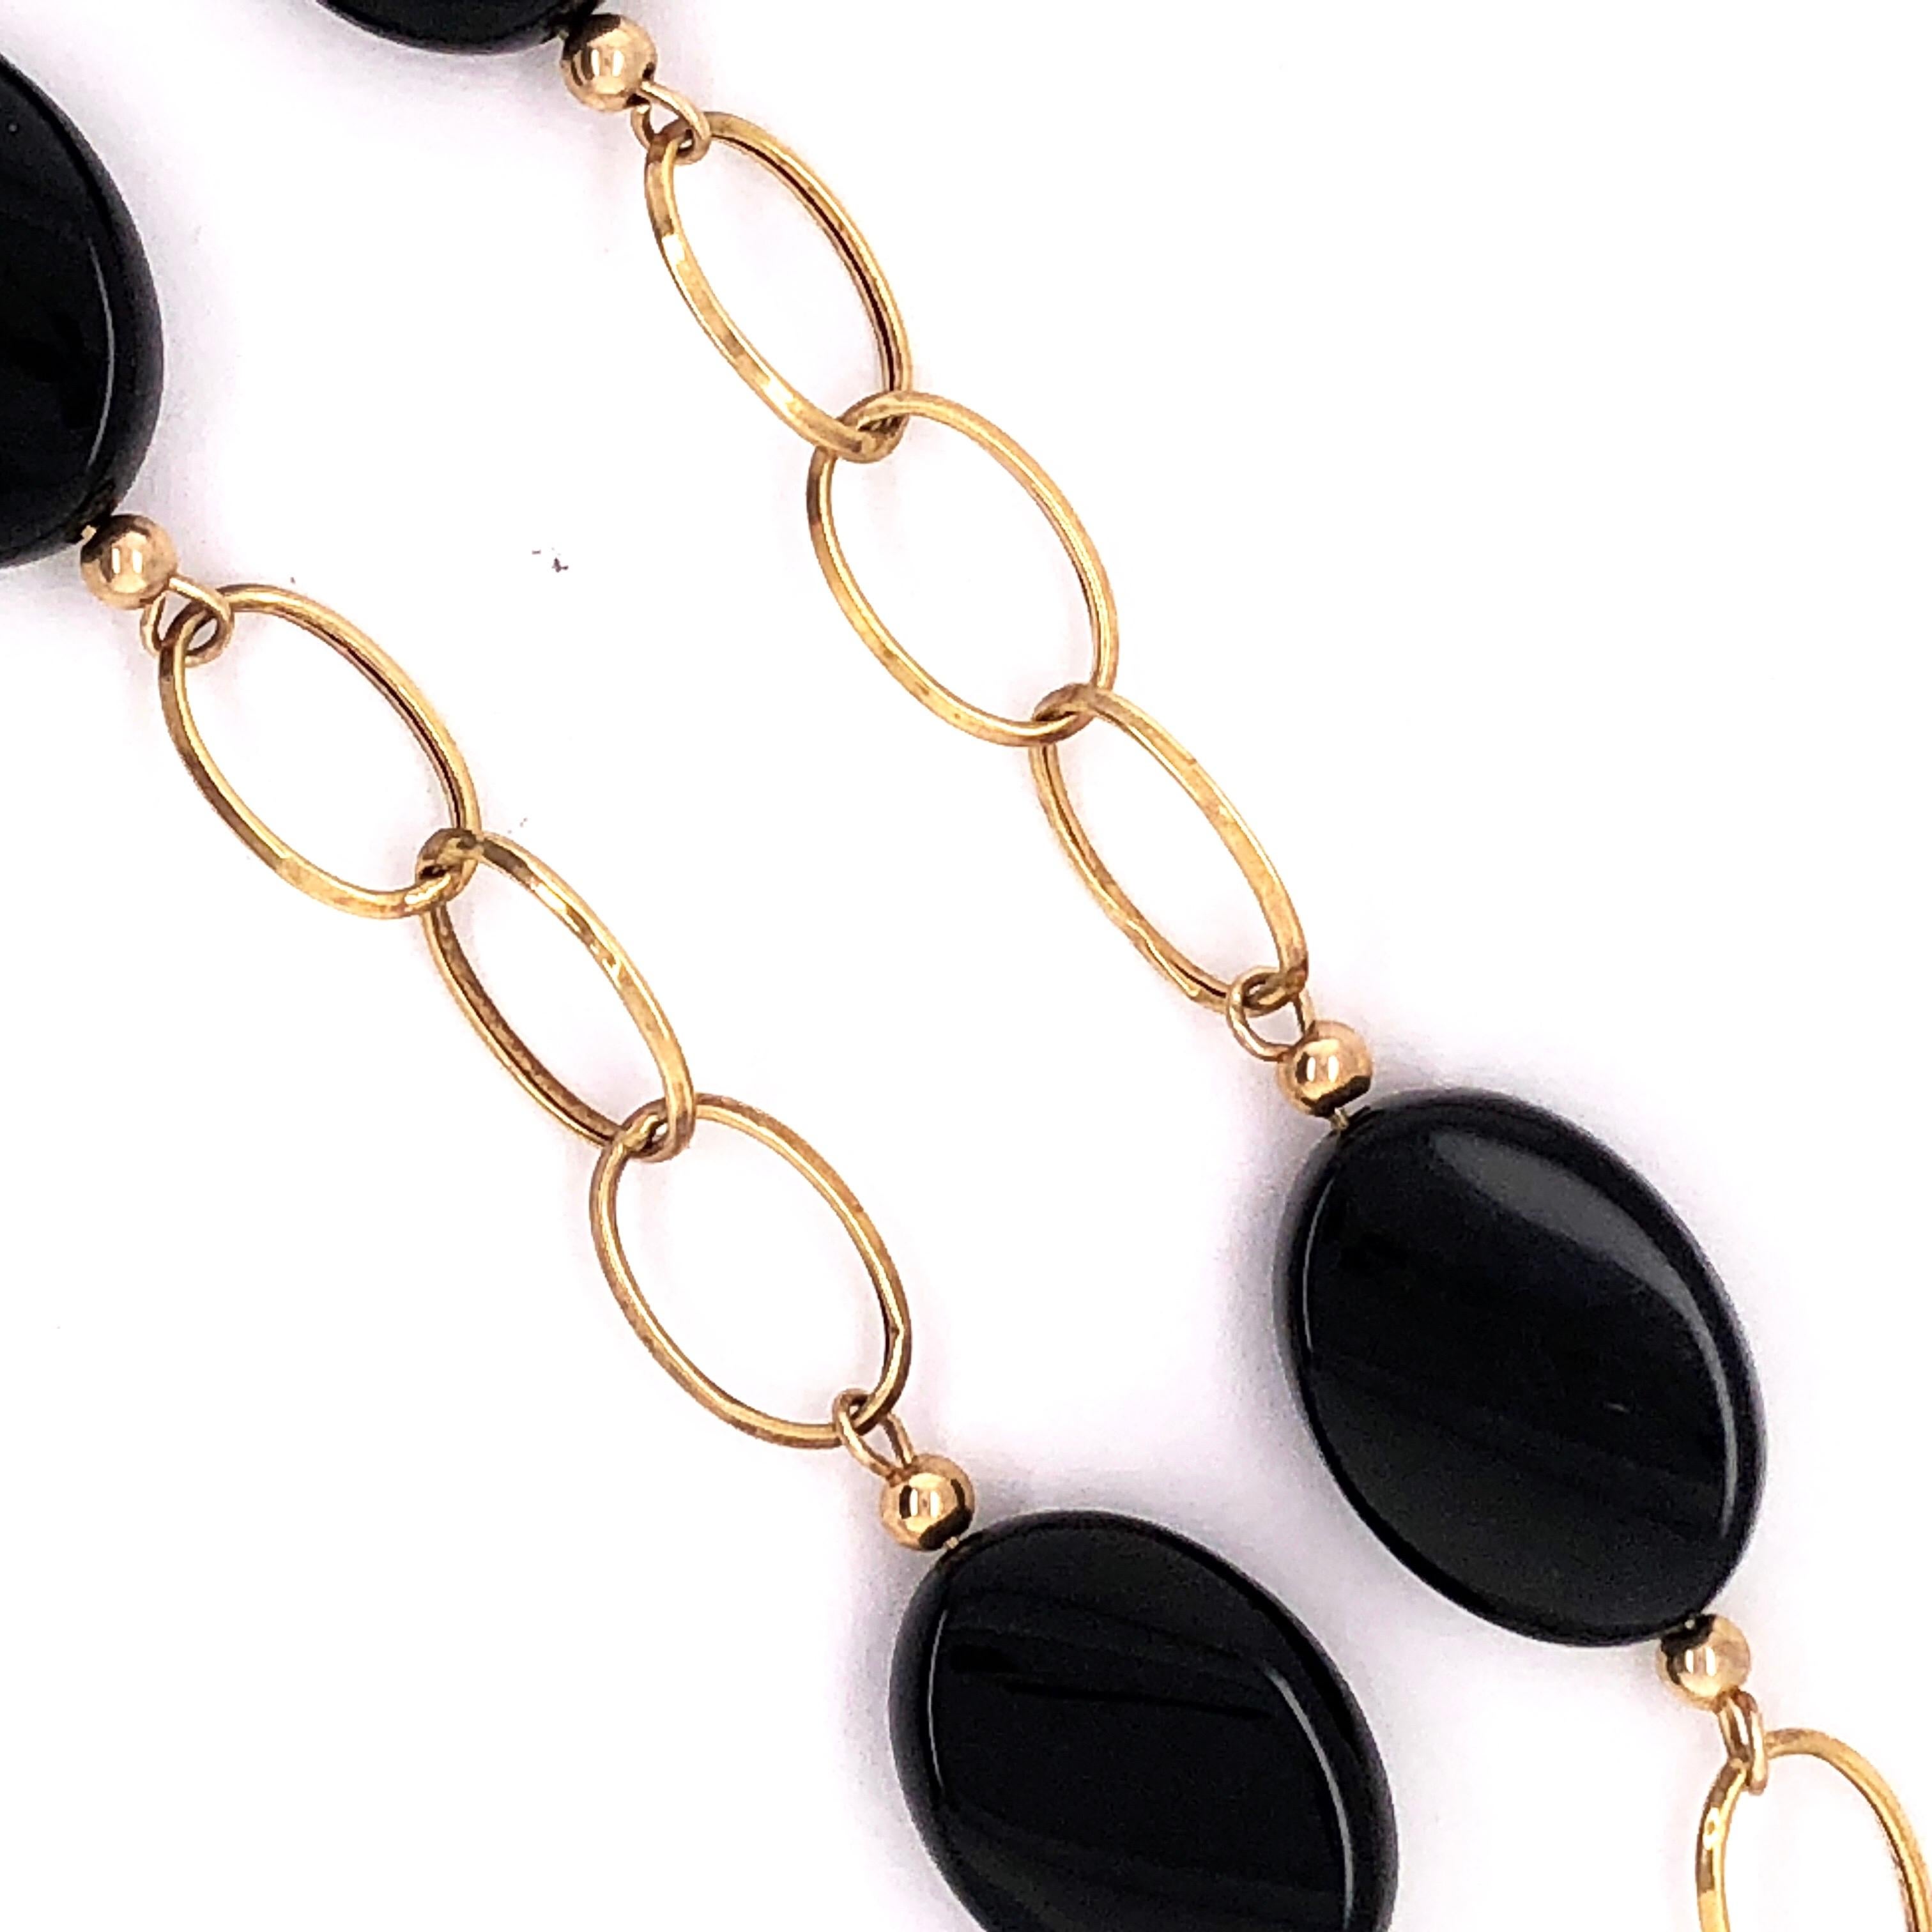 14 Karat Yellow Gold Link Necklace with Ebony Stones 21.2 Grams Total For Sale 2